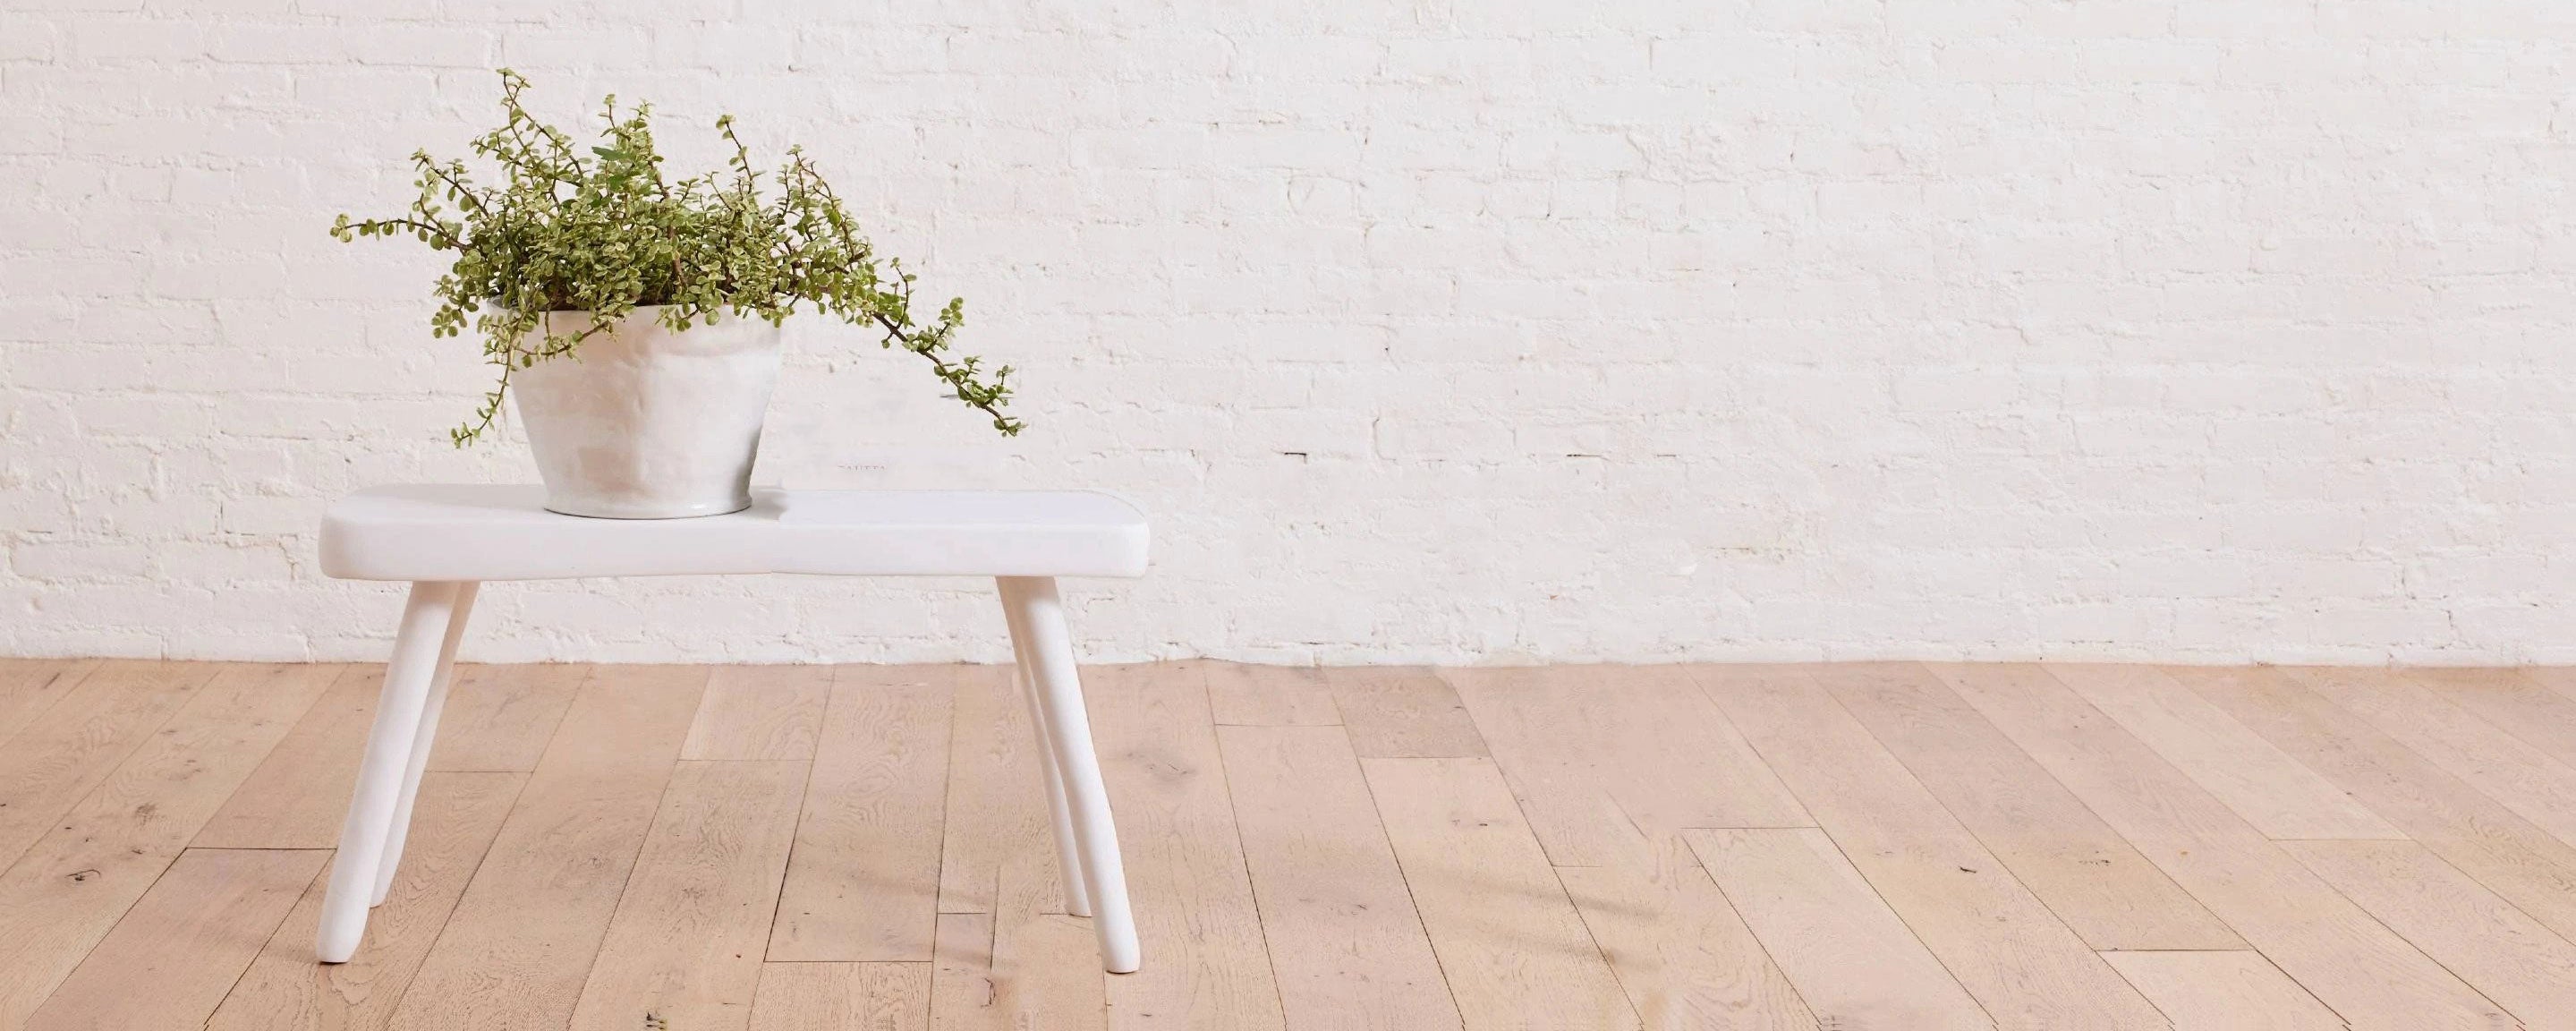 the resin petite bench by tina frey